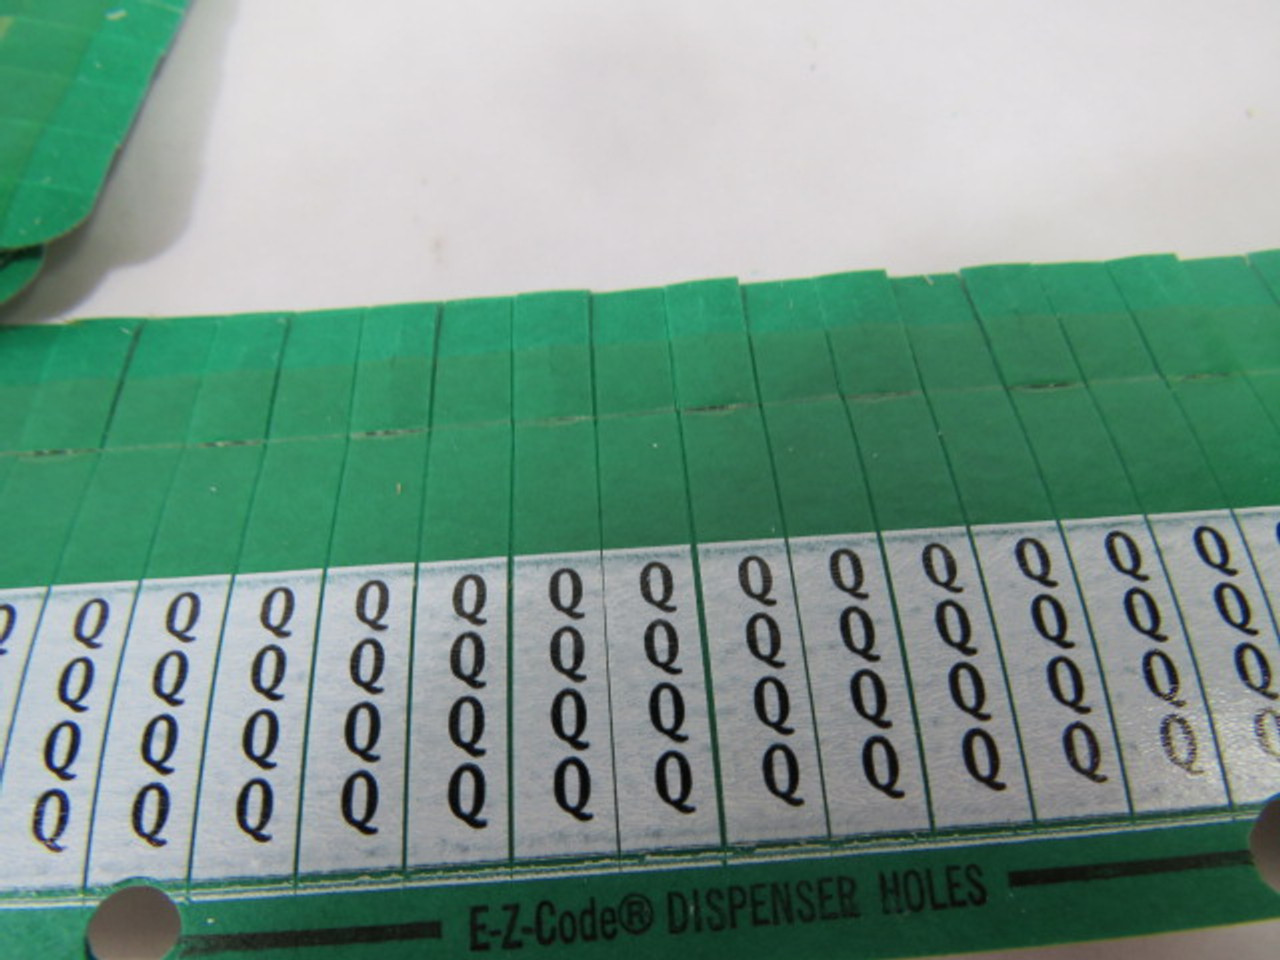 Thomas & Betts Q E-Z-Code Wire Markers Lot of 16 ! NEW !